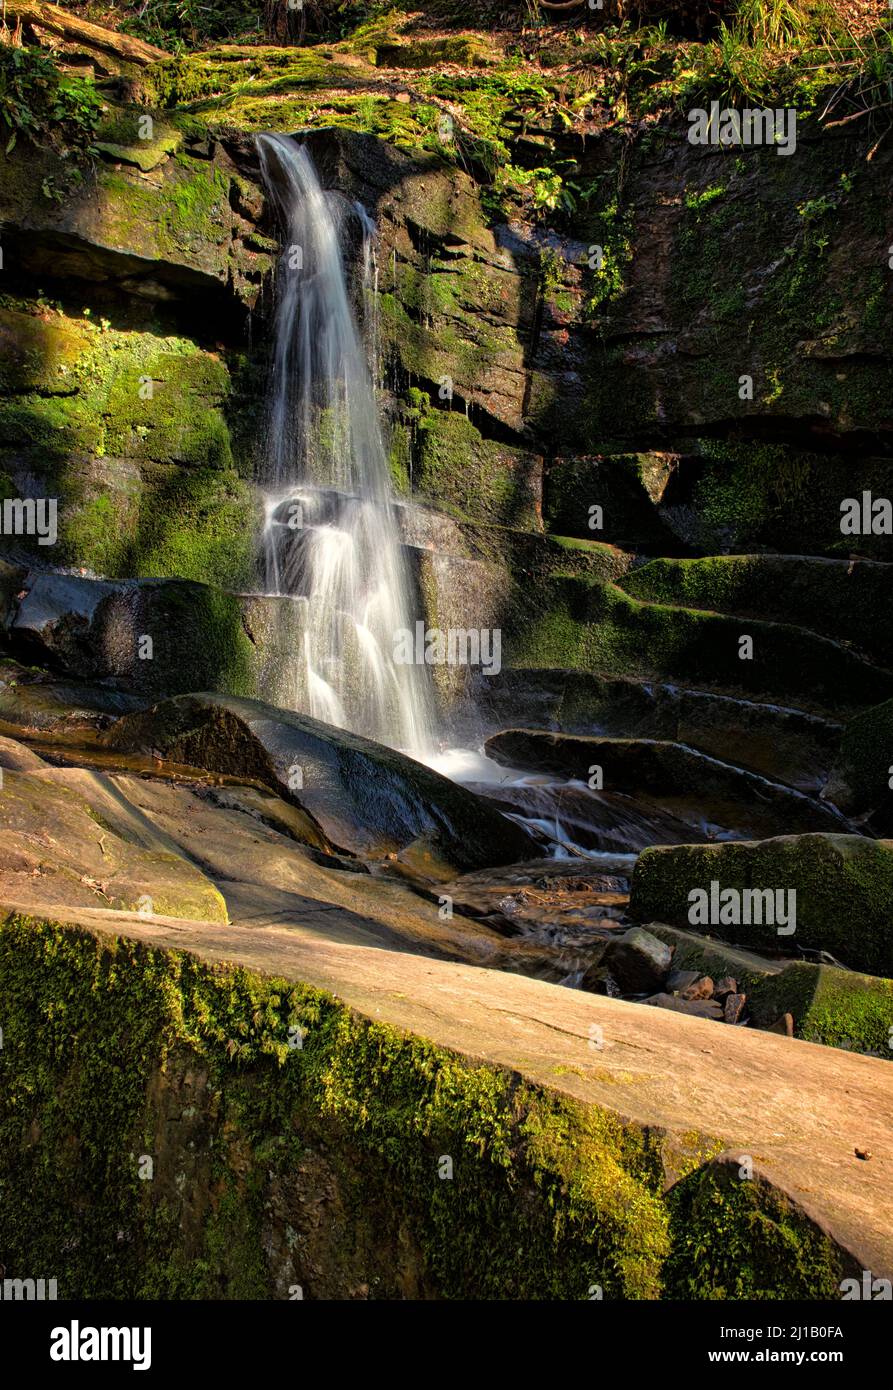 The waterfall at Fairy Glen, Appley Bridge, viewed from the stream bed Stock Photo